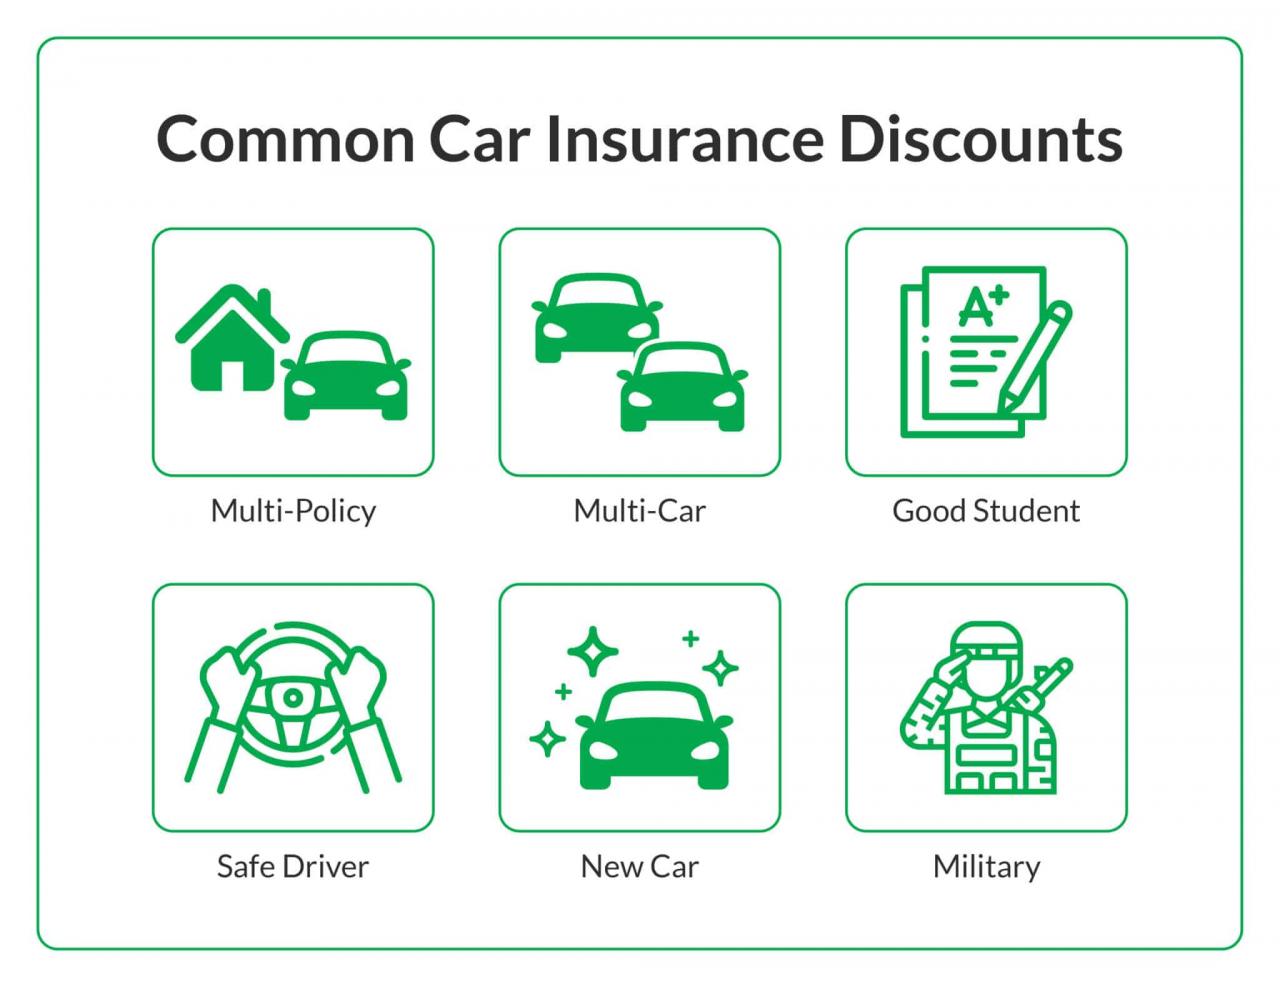 Icons representing six common discounts offered by car insurance companies